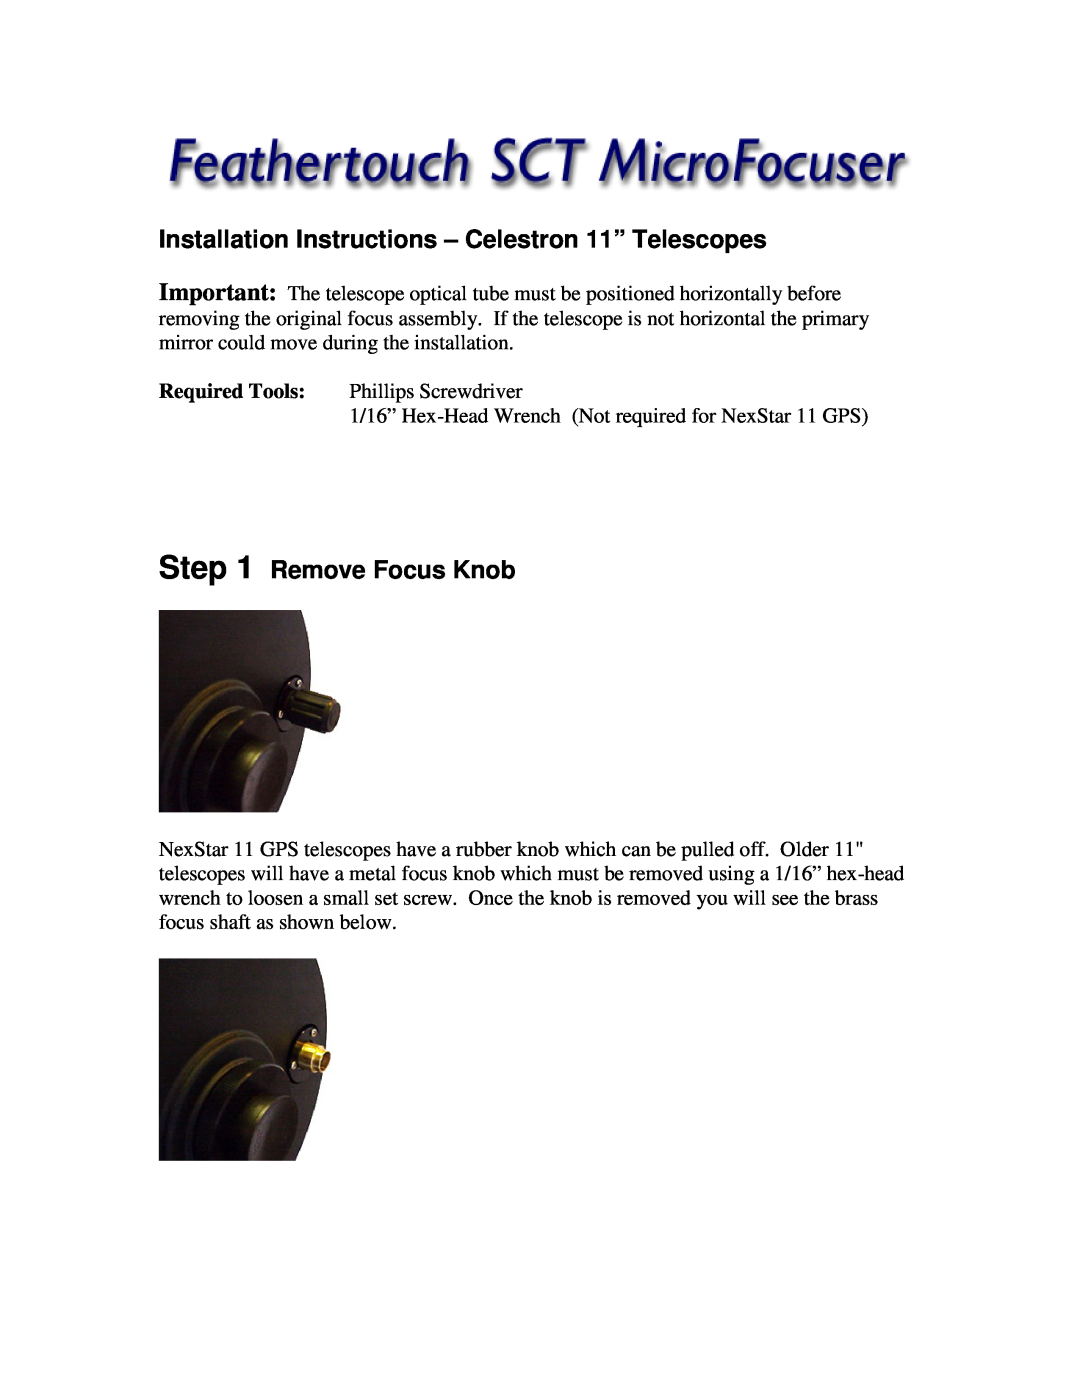 Celestron Feathertouch SCT Microfocuser installation instructions Remove Focus Knob, Required Tools 